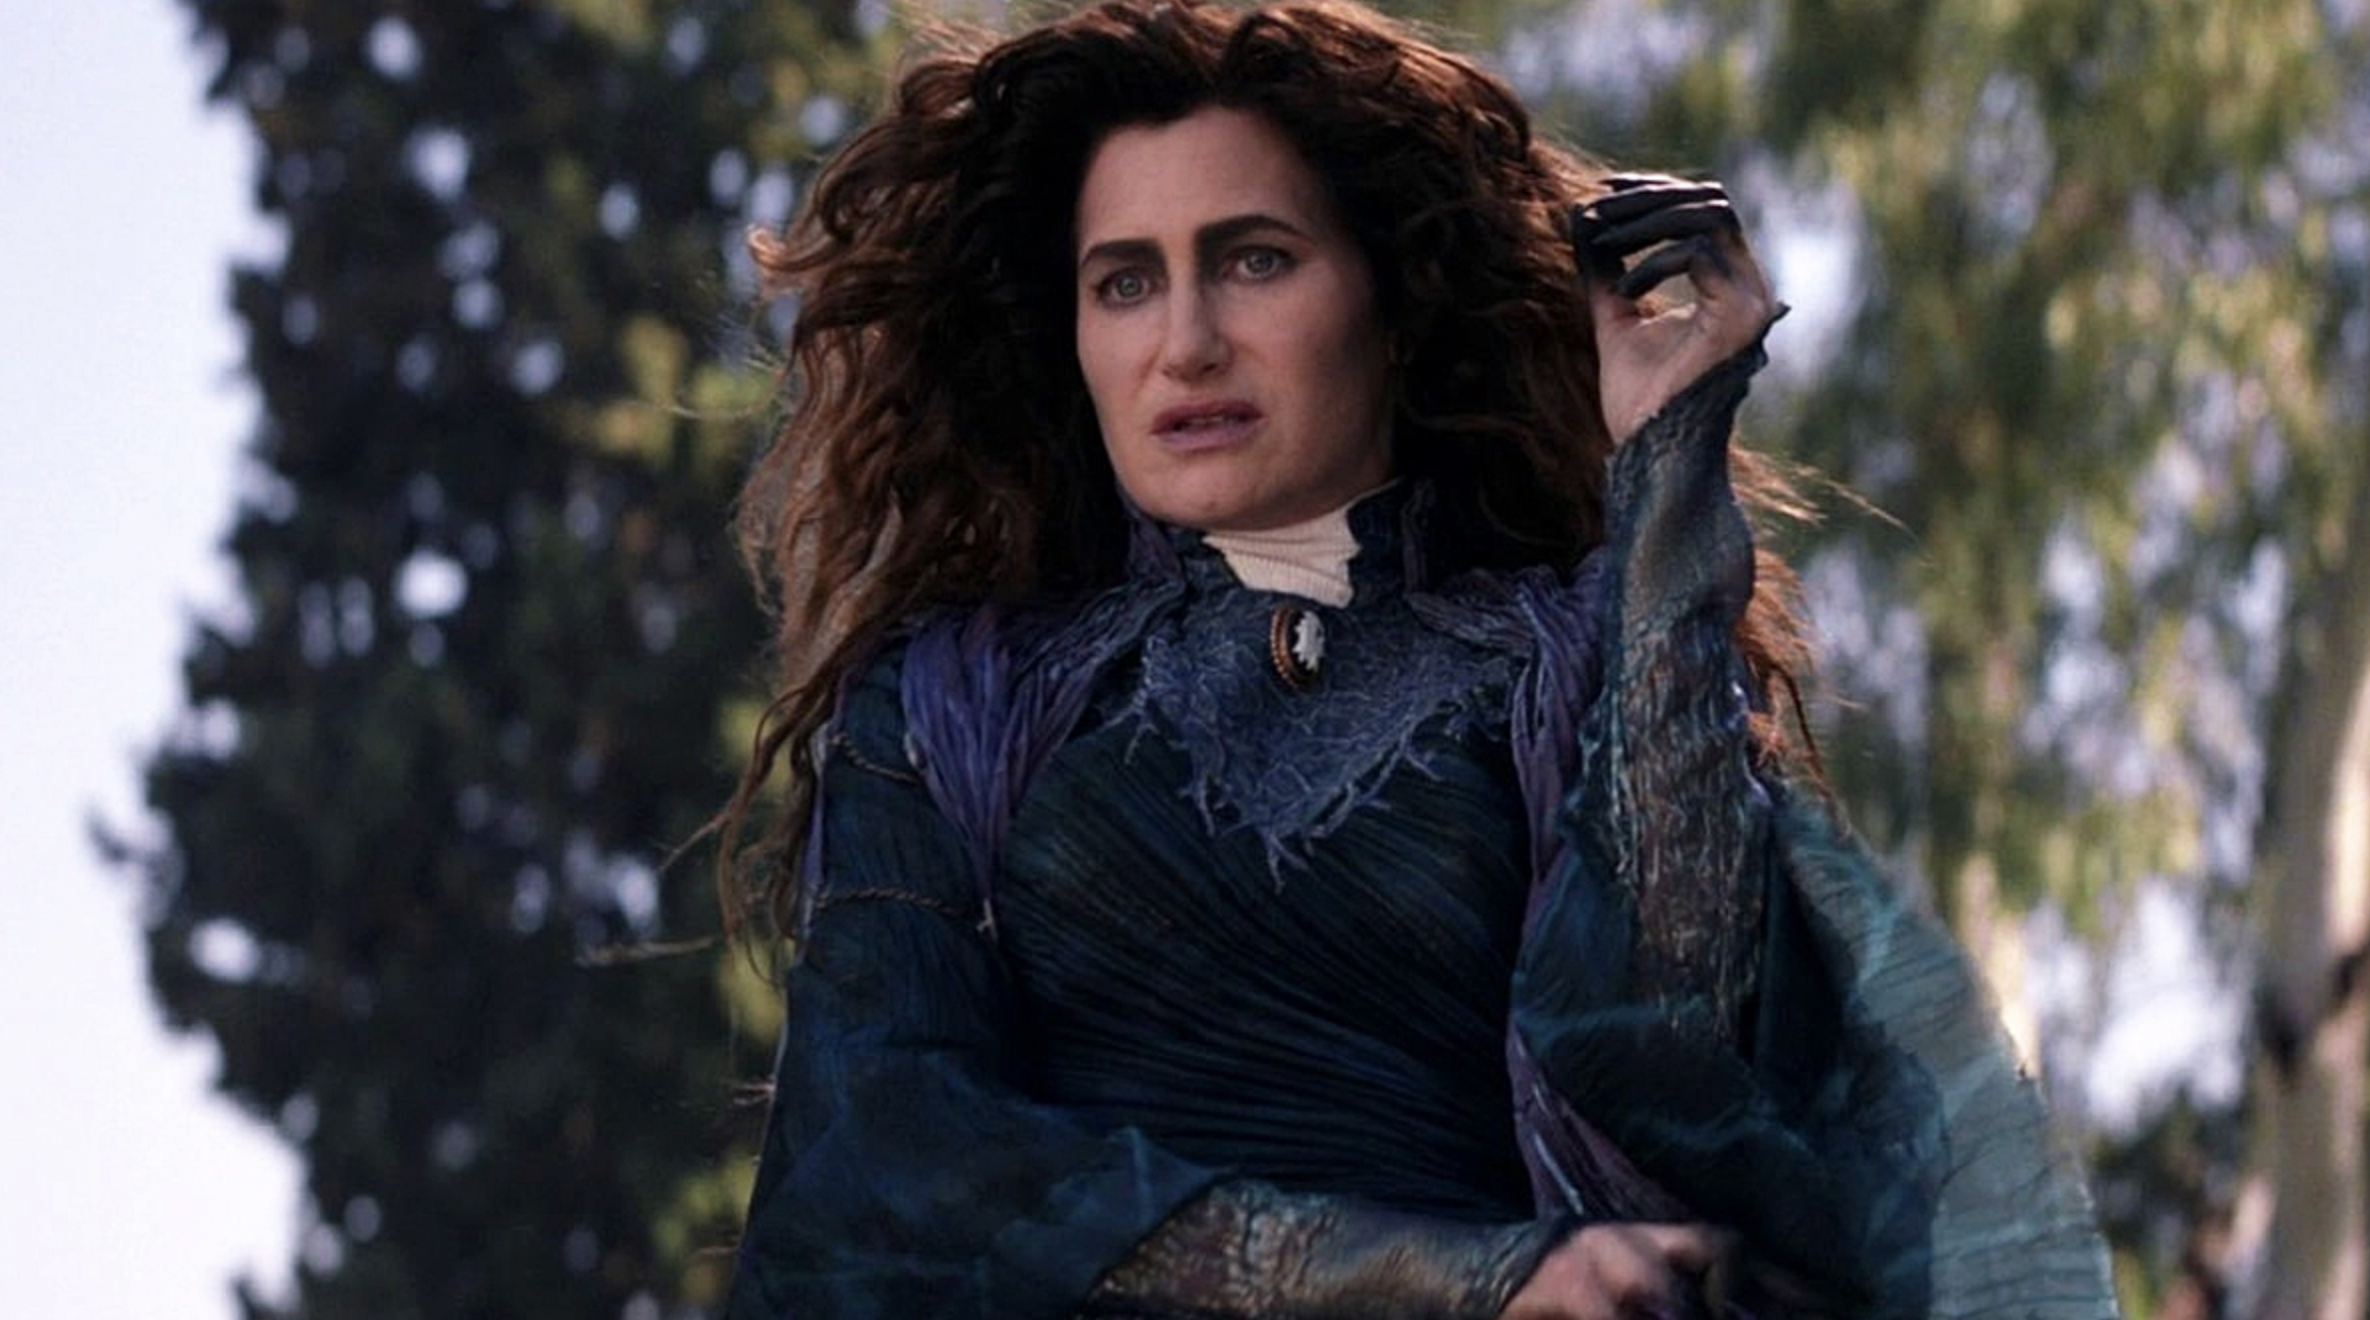 SEE IT: Leaked Photos Of Kathryn Hahn & Cast On Set For ‘Agatha: Coven of Chaos’